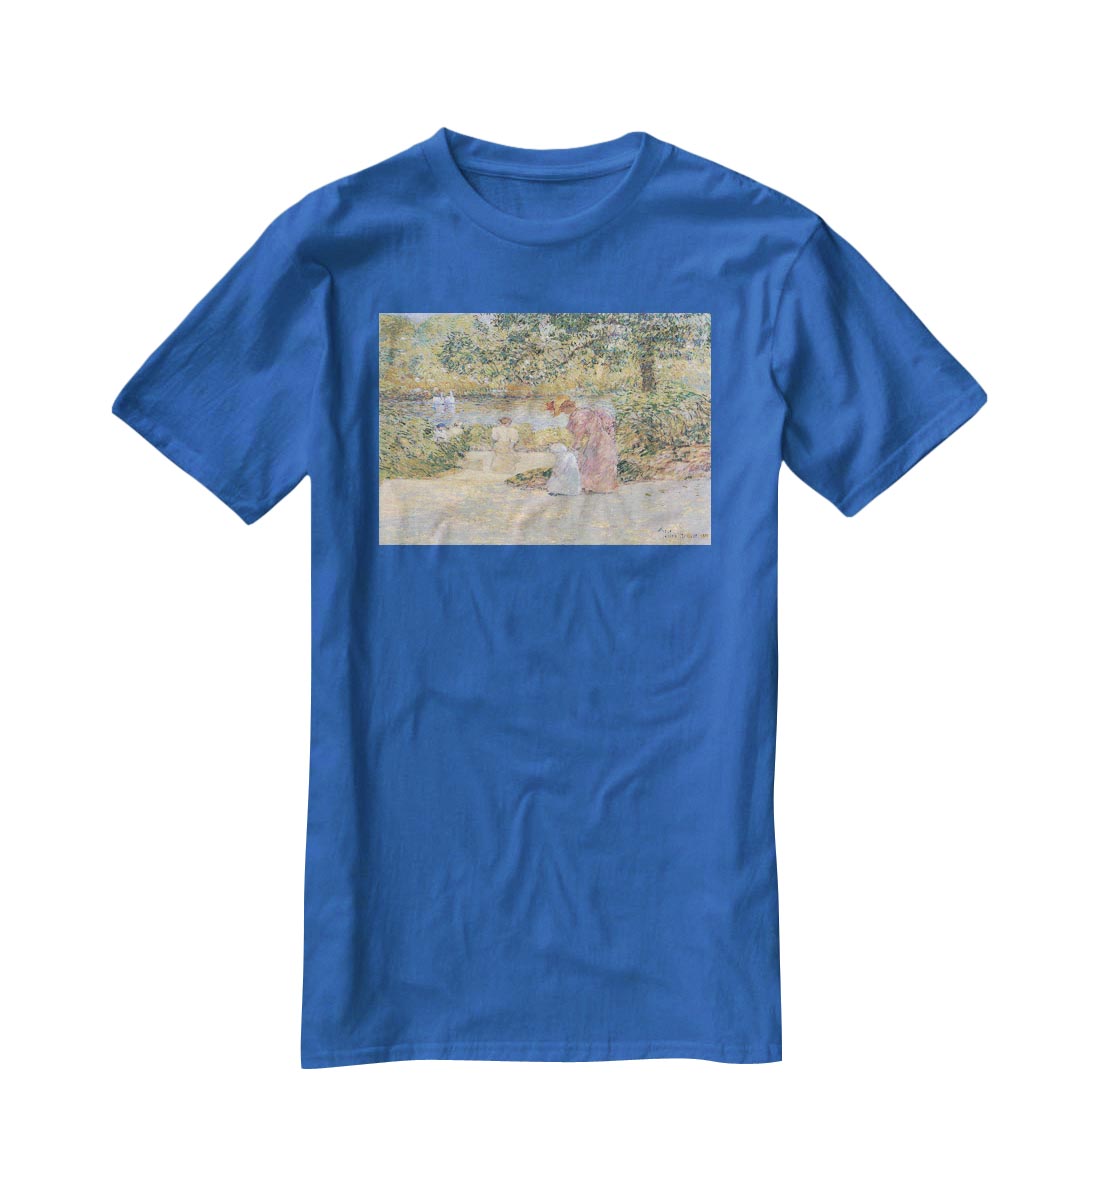 The staircase at Central Park by Hassam T-Shirt - Canvas Art Rocks - 2